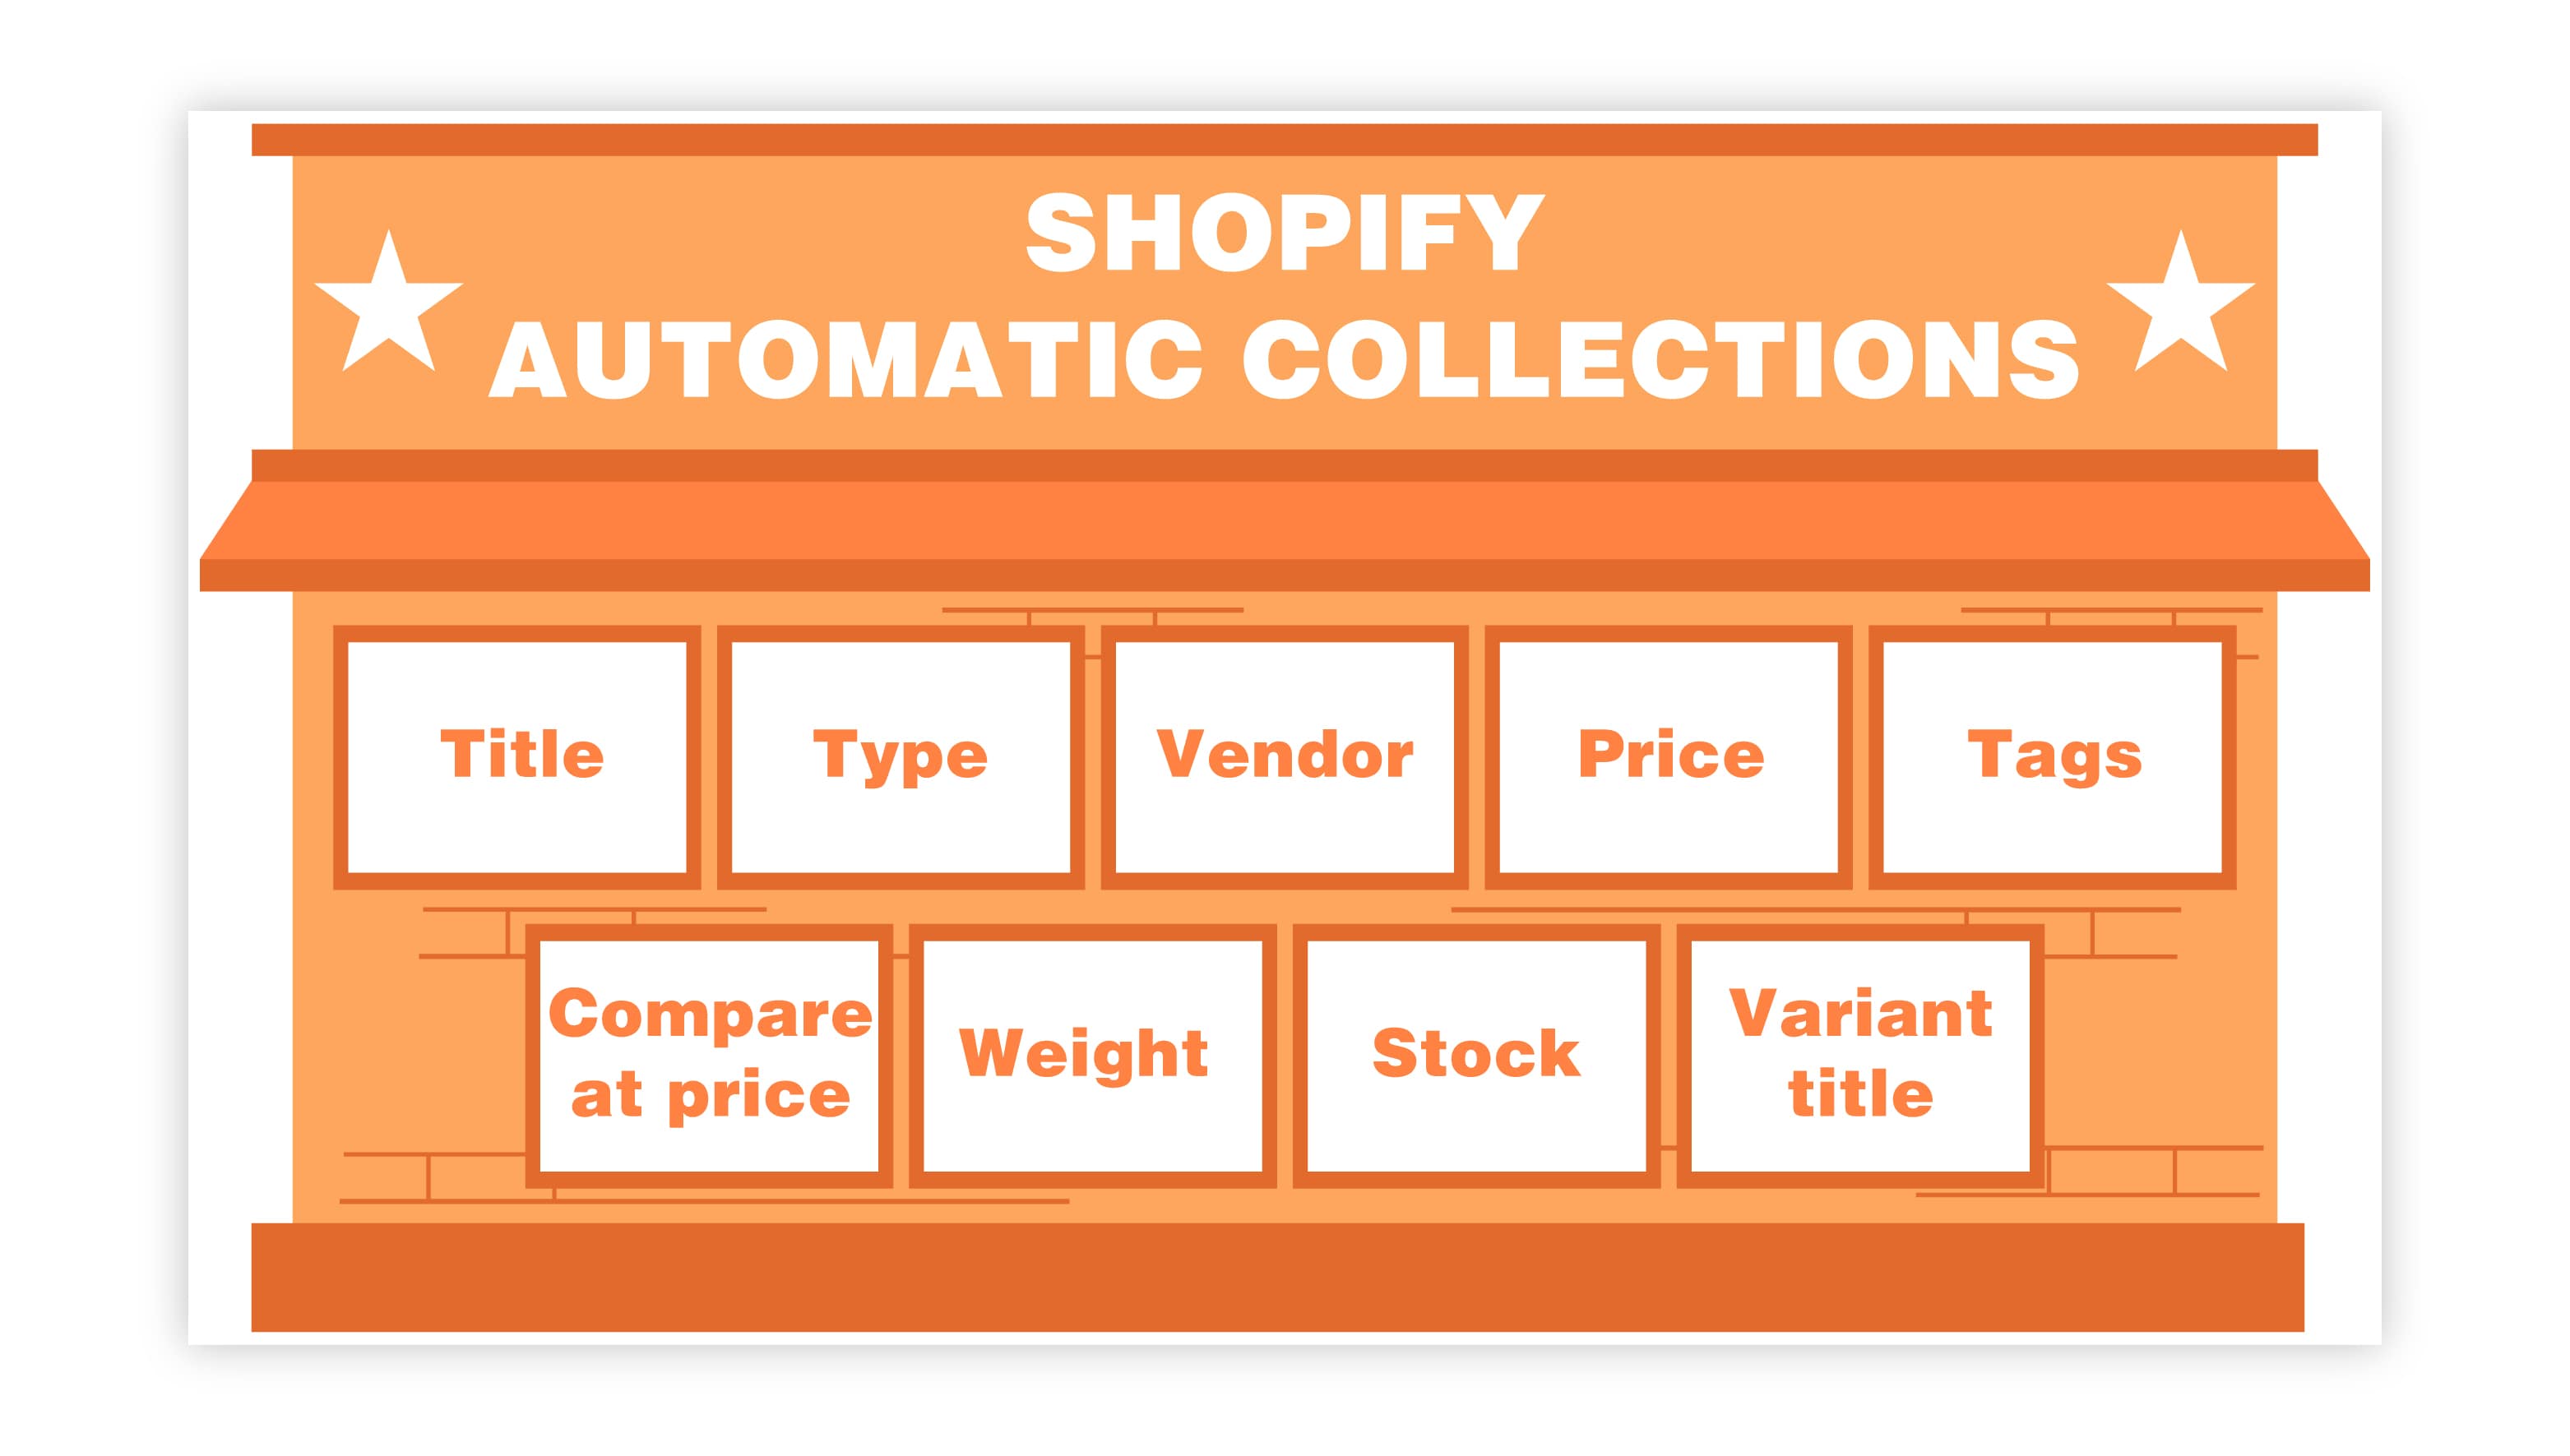 5 - SHOPIFY AUTOMATIC COLLECTIONS